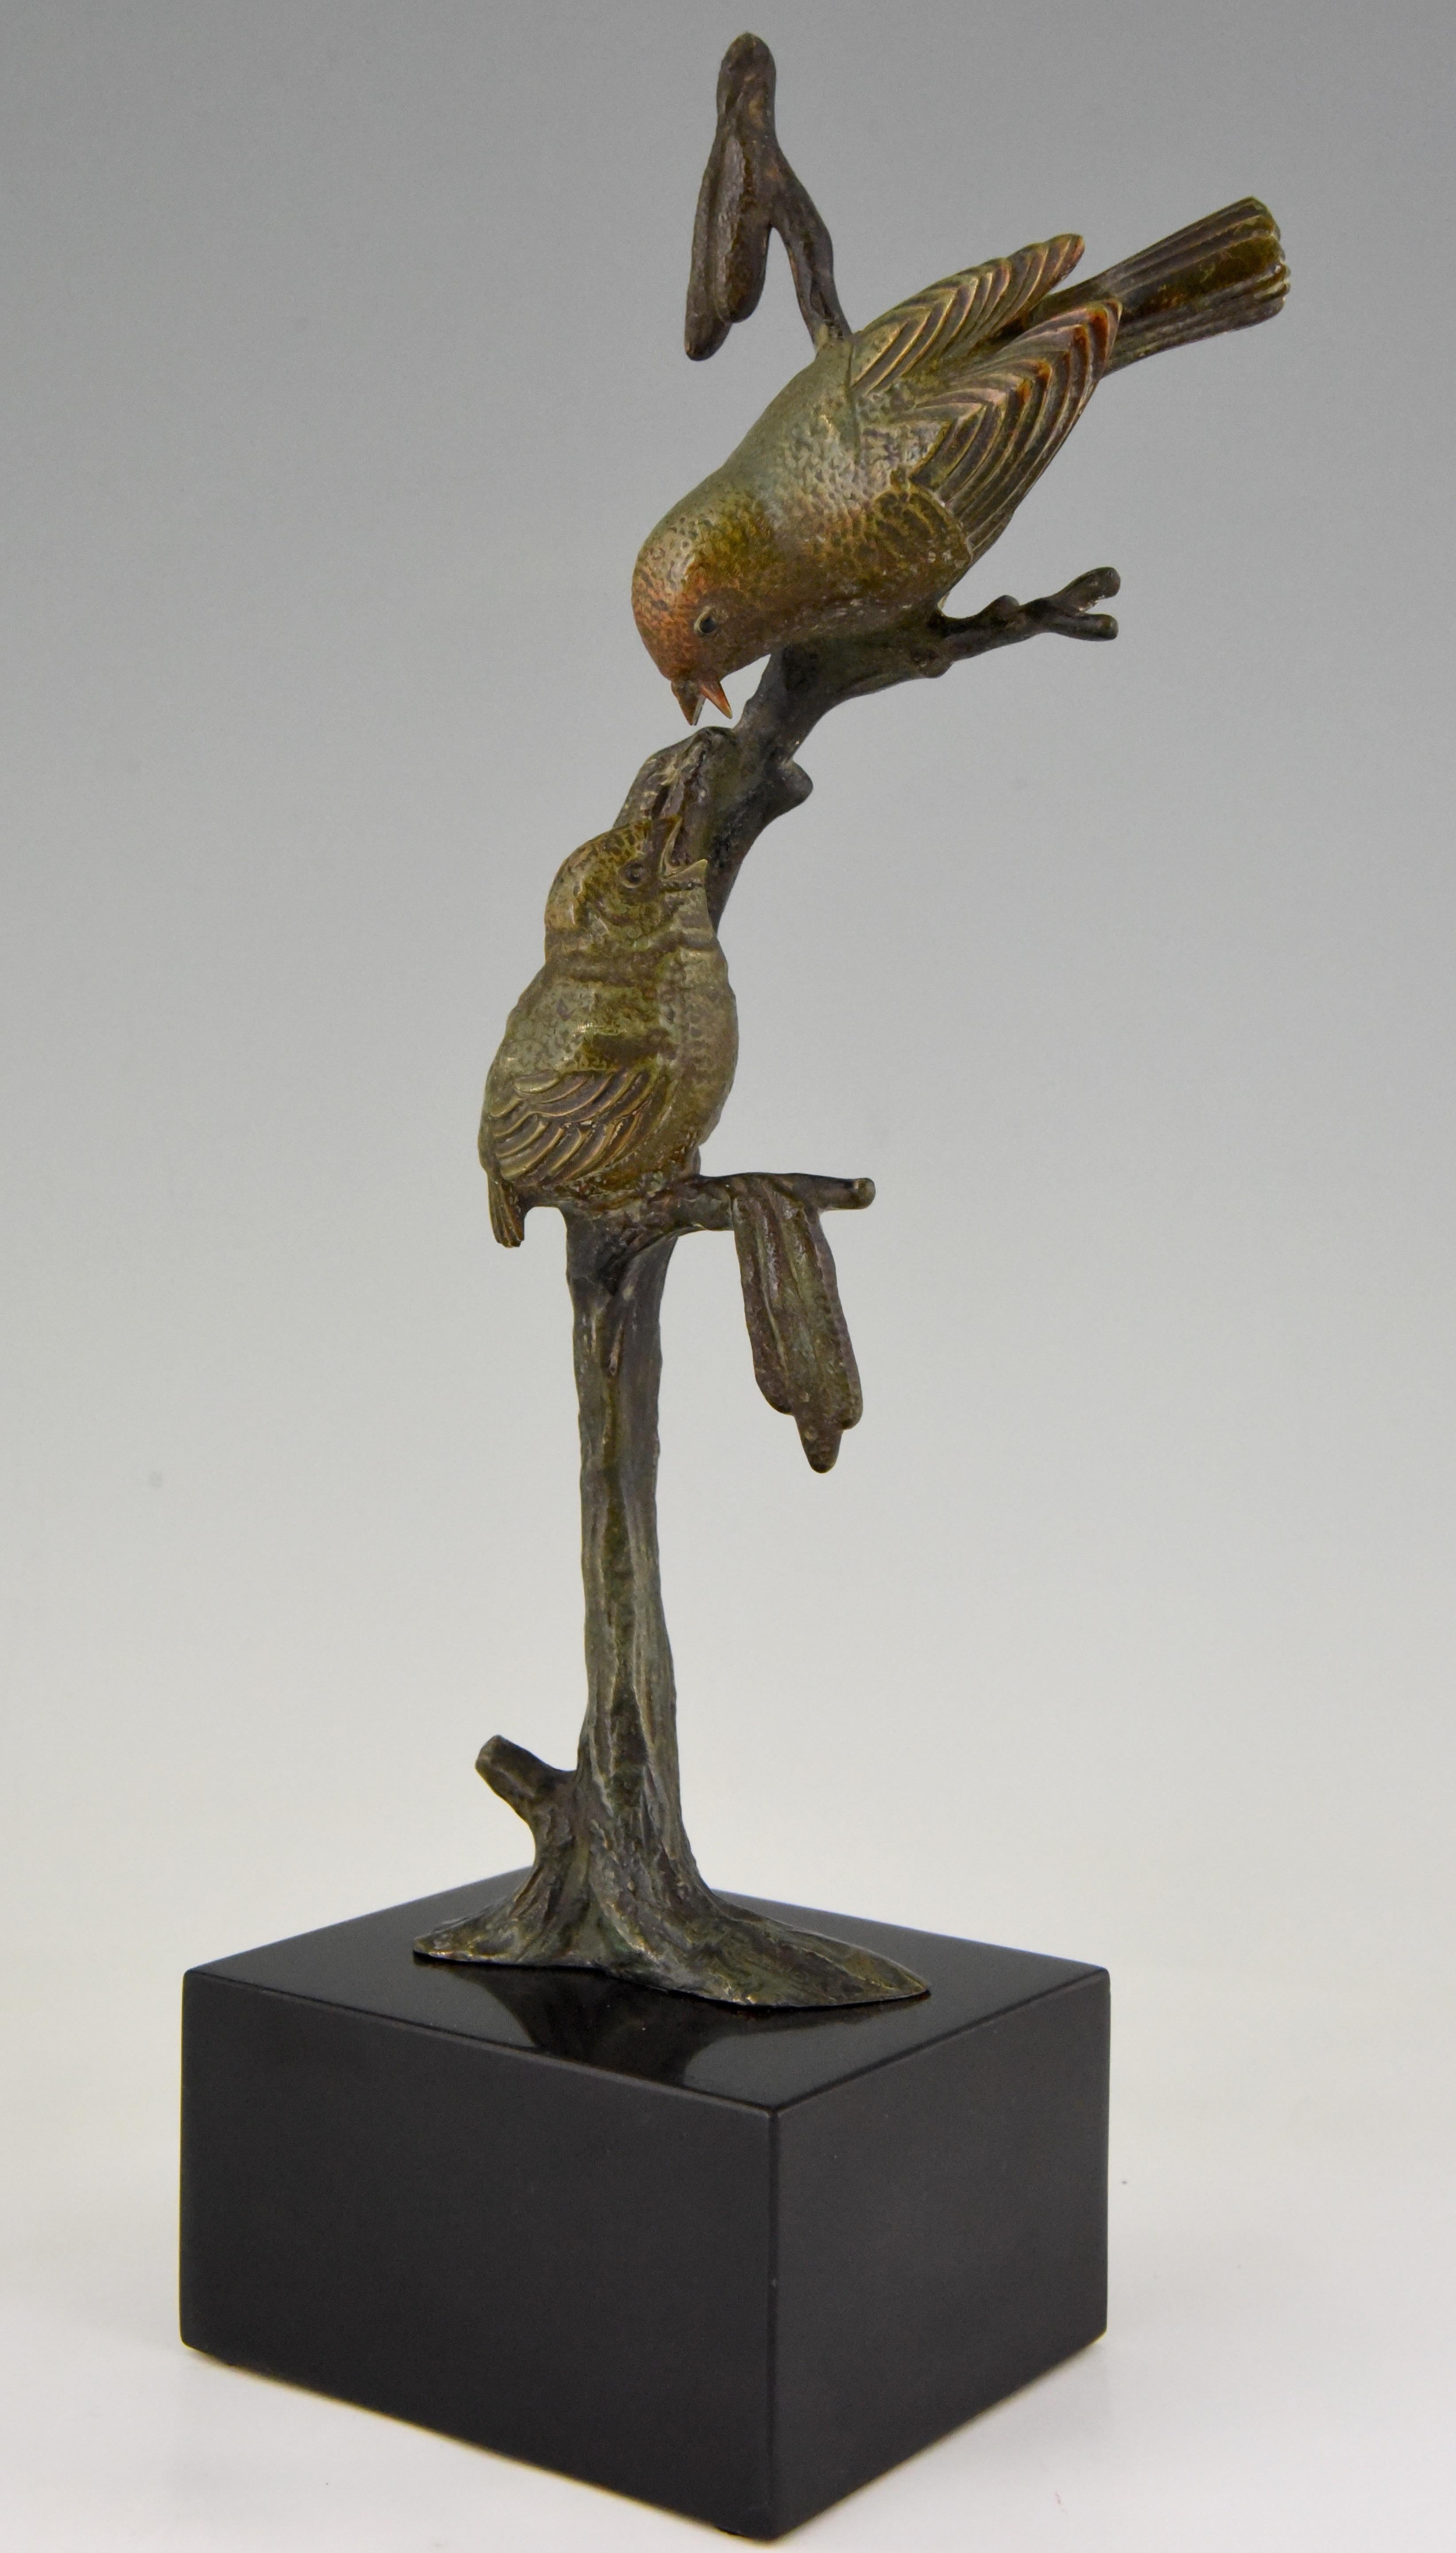 French Art Deco Bronze Sculpture Two Birds on an Branch by Irenee Rochard, 1930